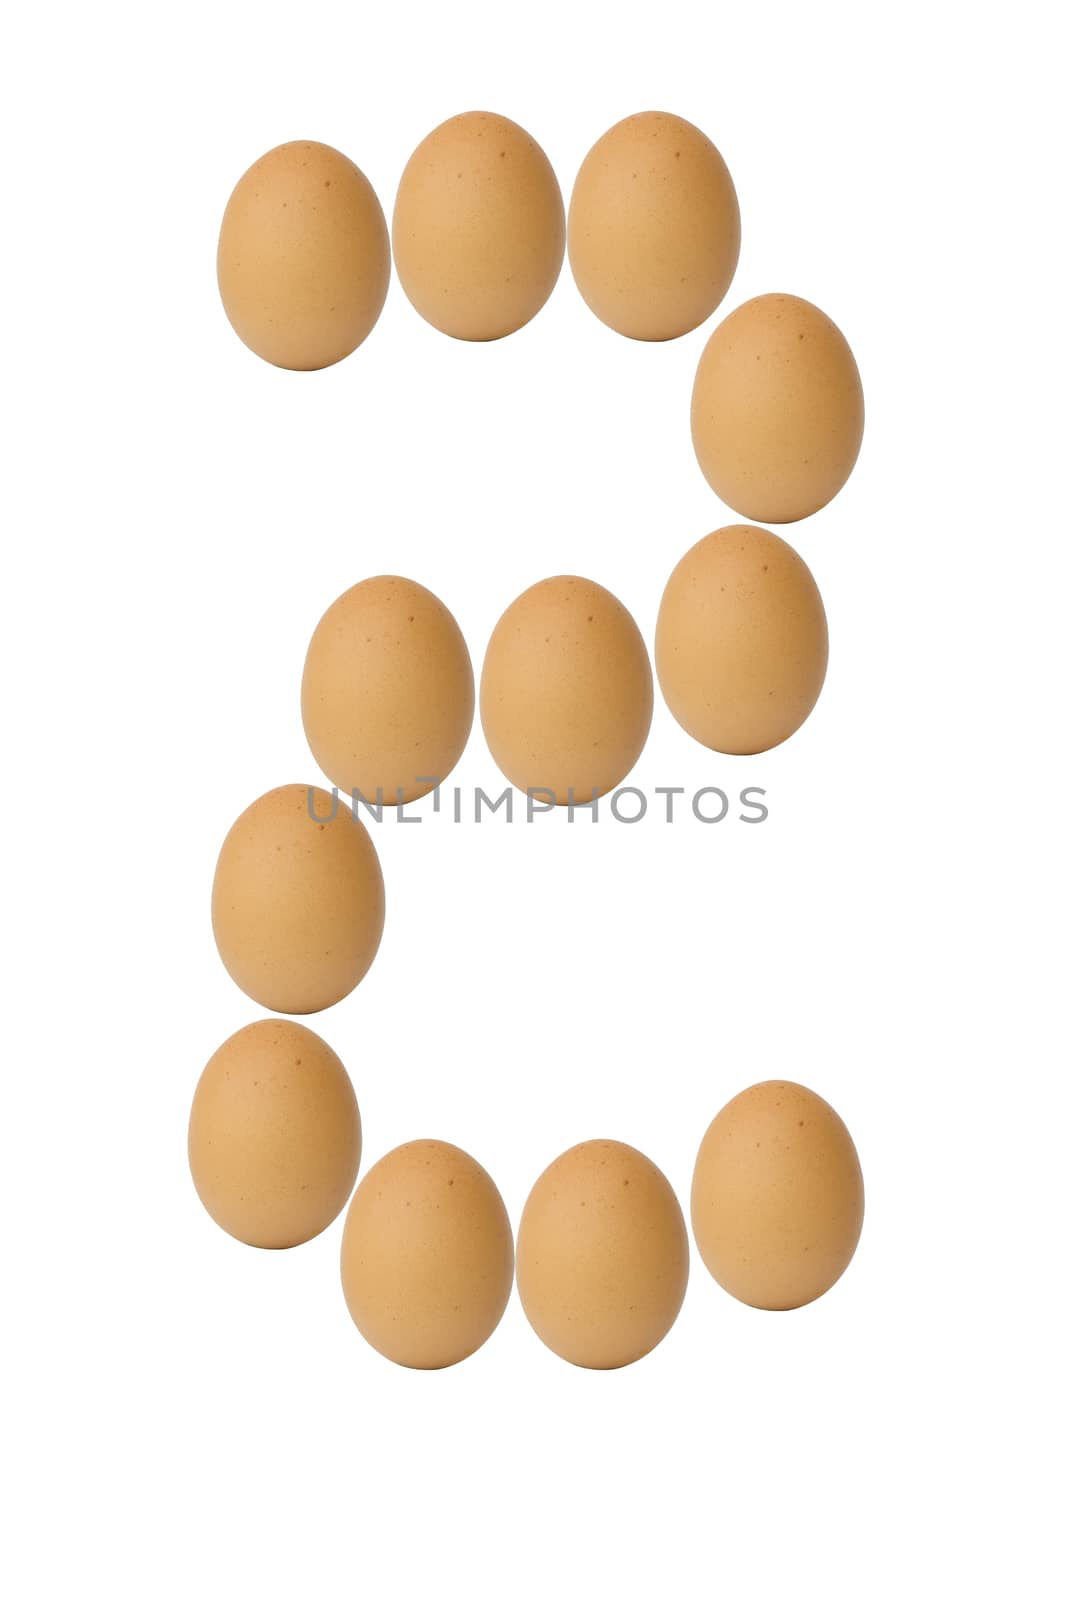 Number 0 to 9 from brown eggs alphabet isolated on white background, two